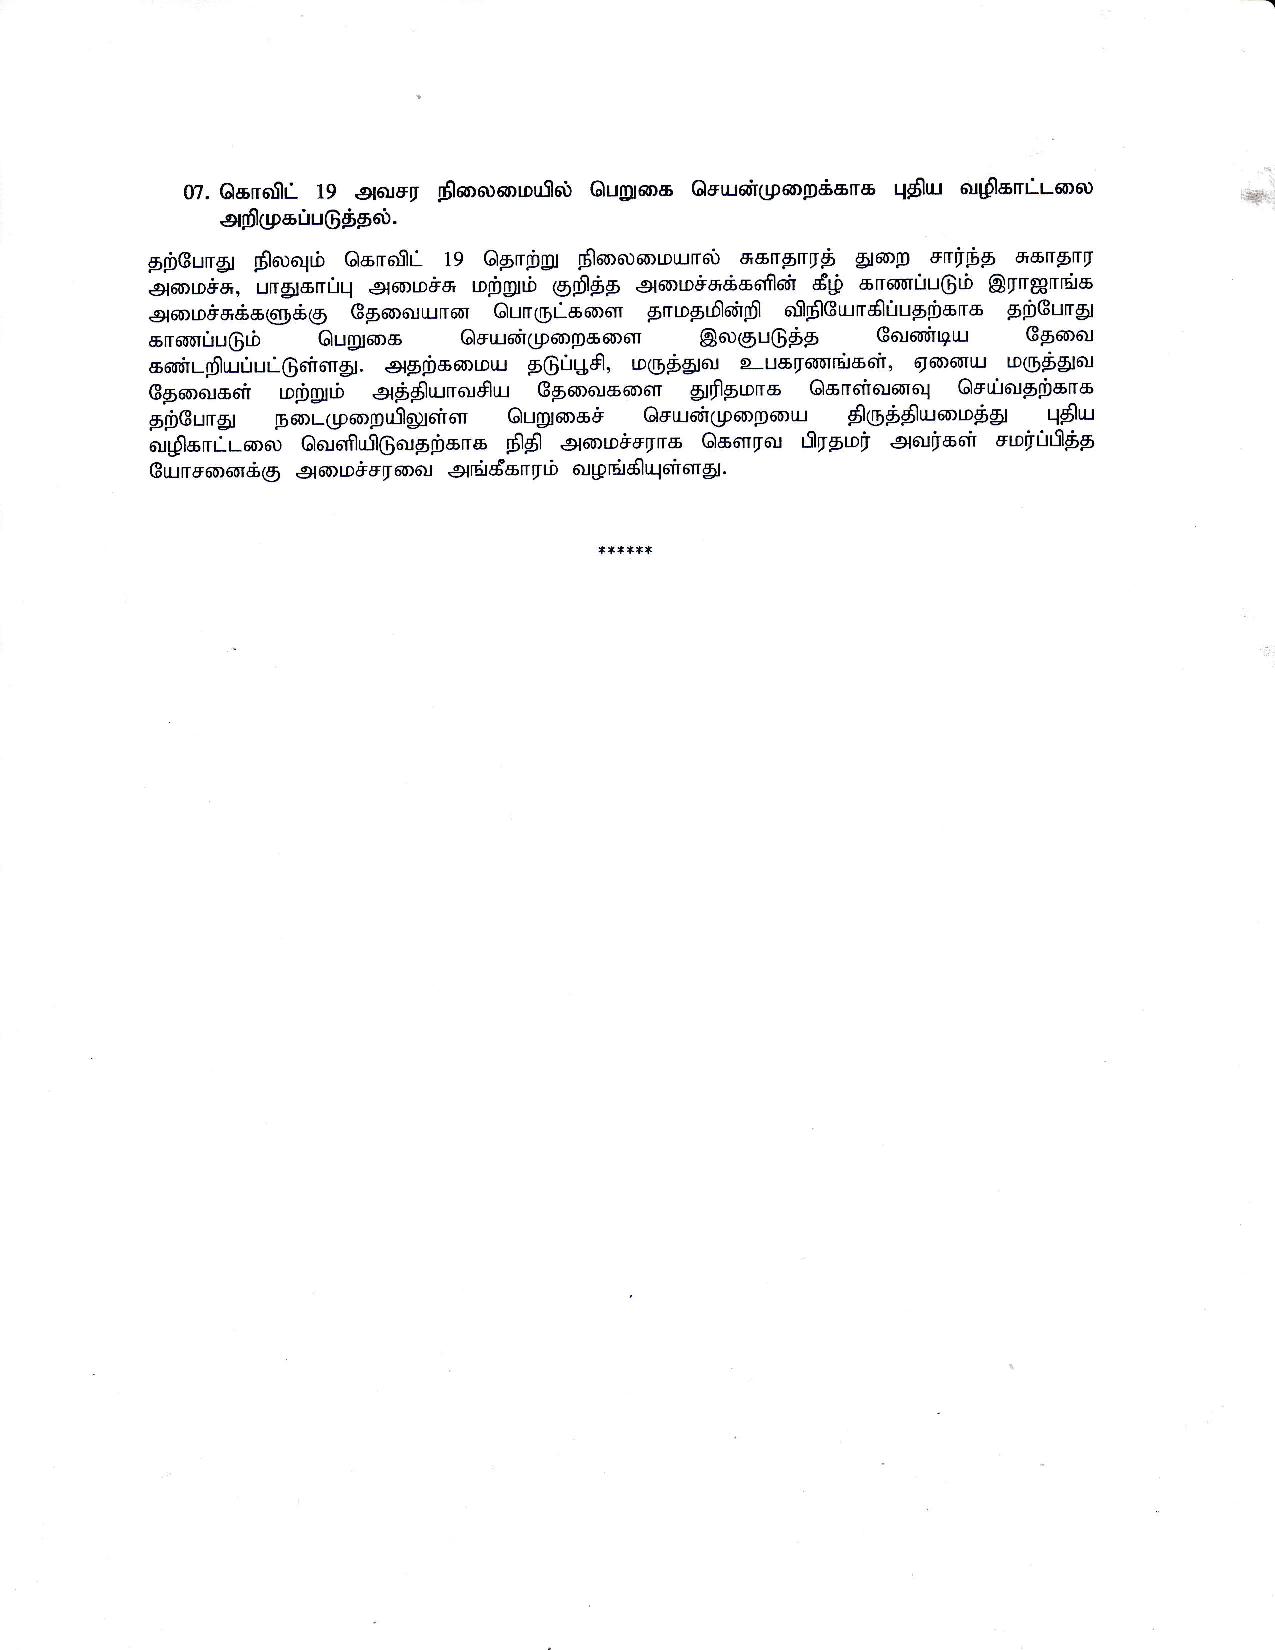 Cabinet Decision on 17.05.201 Tamil page 003